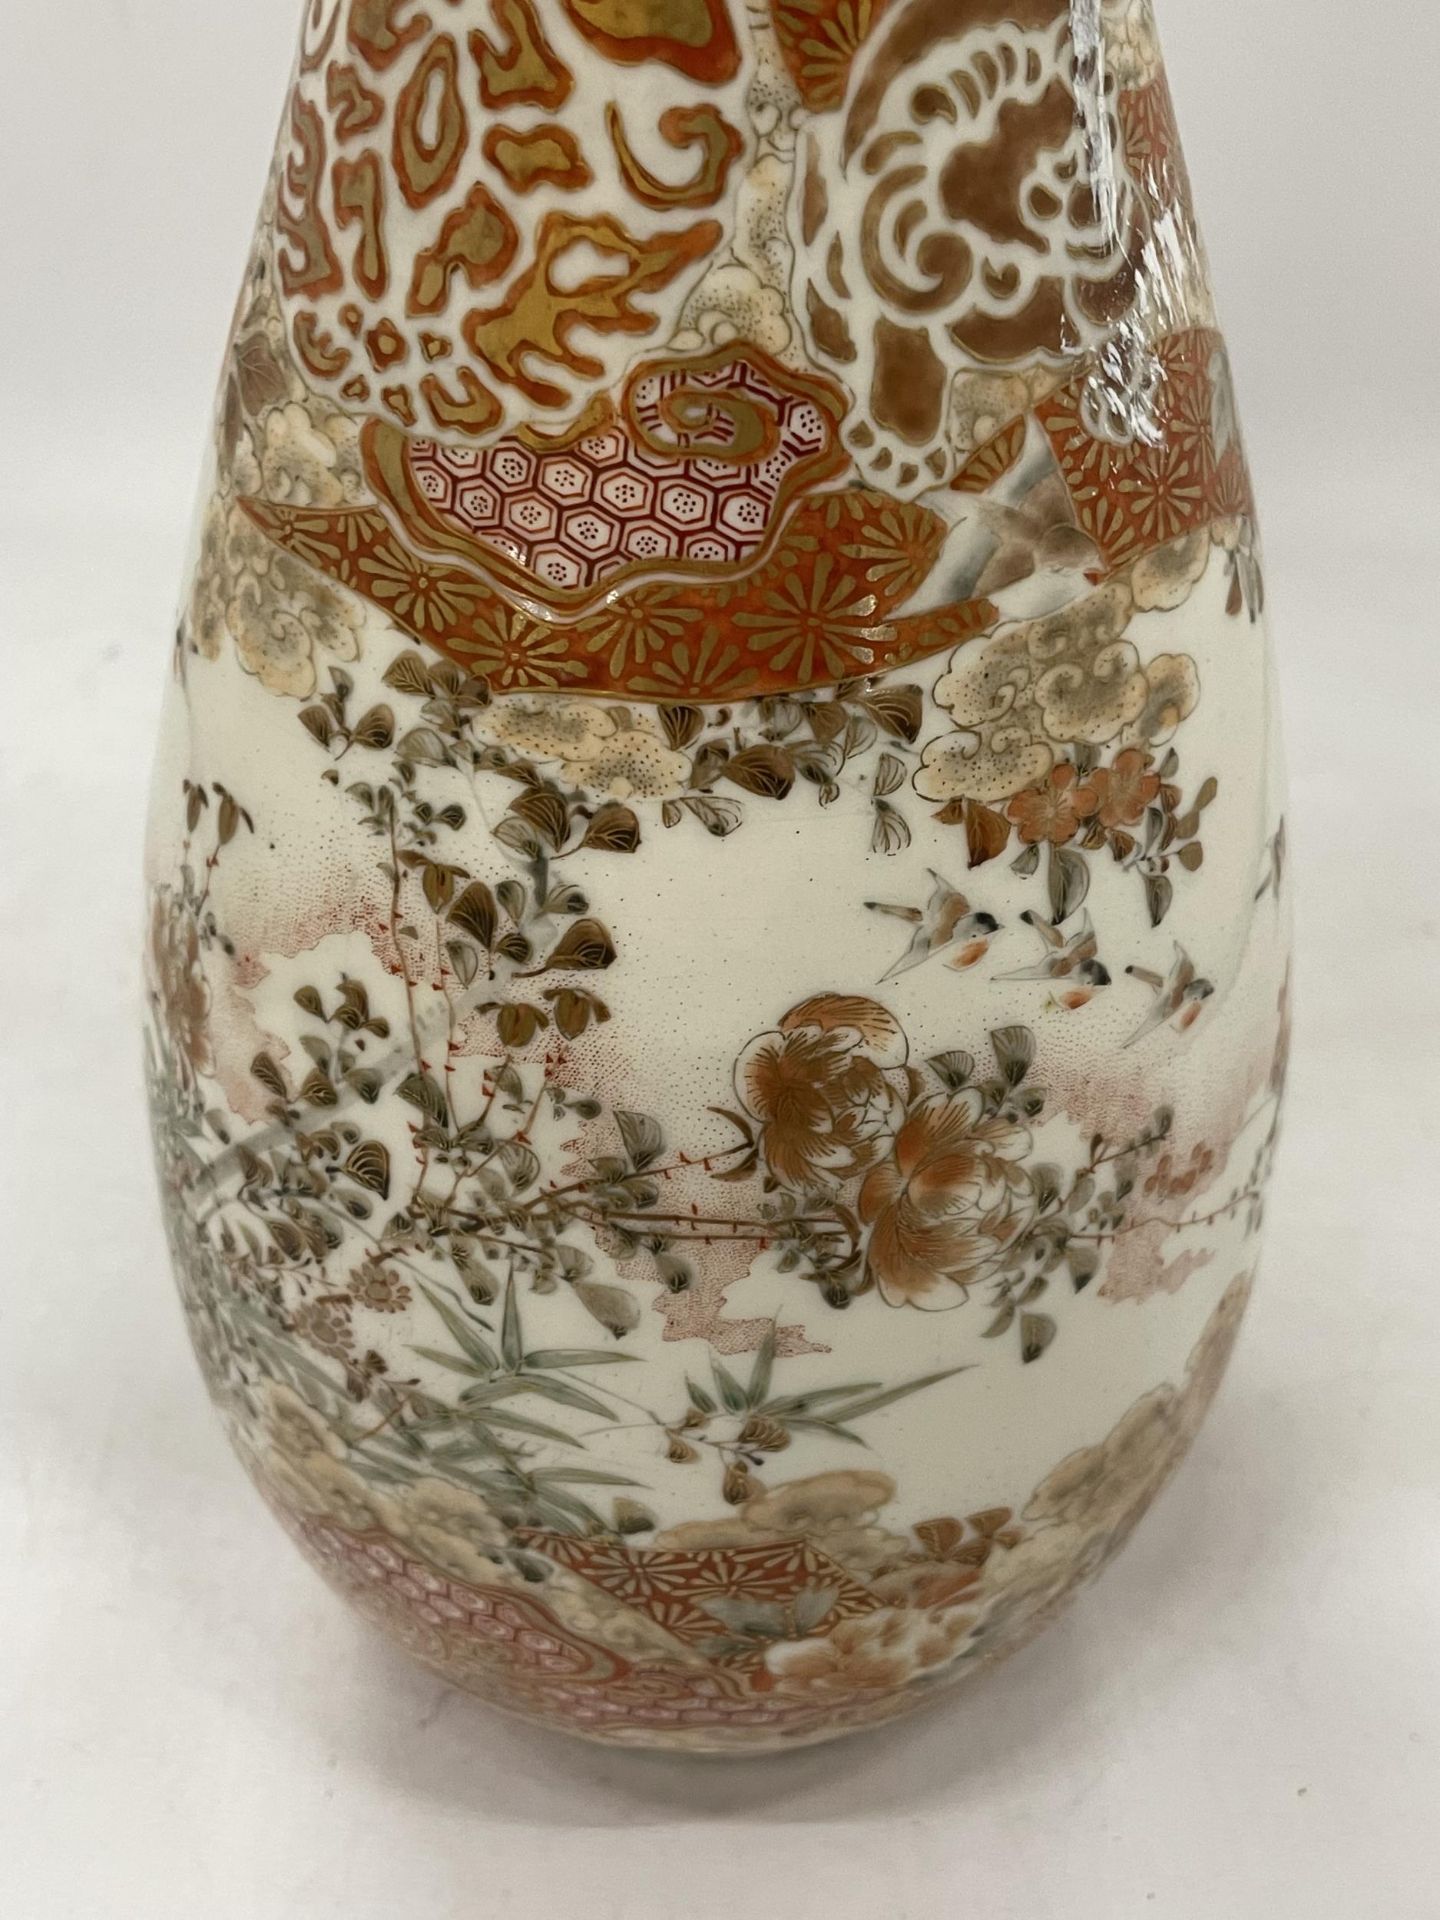 A JAPANESE MEIJI PERIOD (1868-1912) KUTANI BIRD AND FLORAL DESIGN TALL VASE, SIX CHARACTER MARK TO - Image 4 of 5